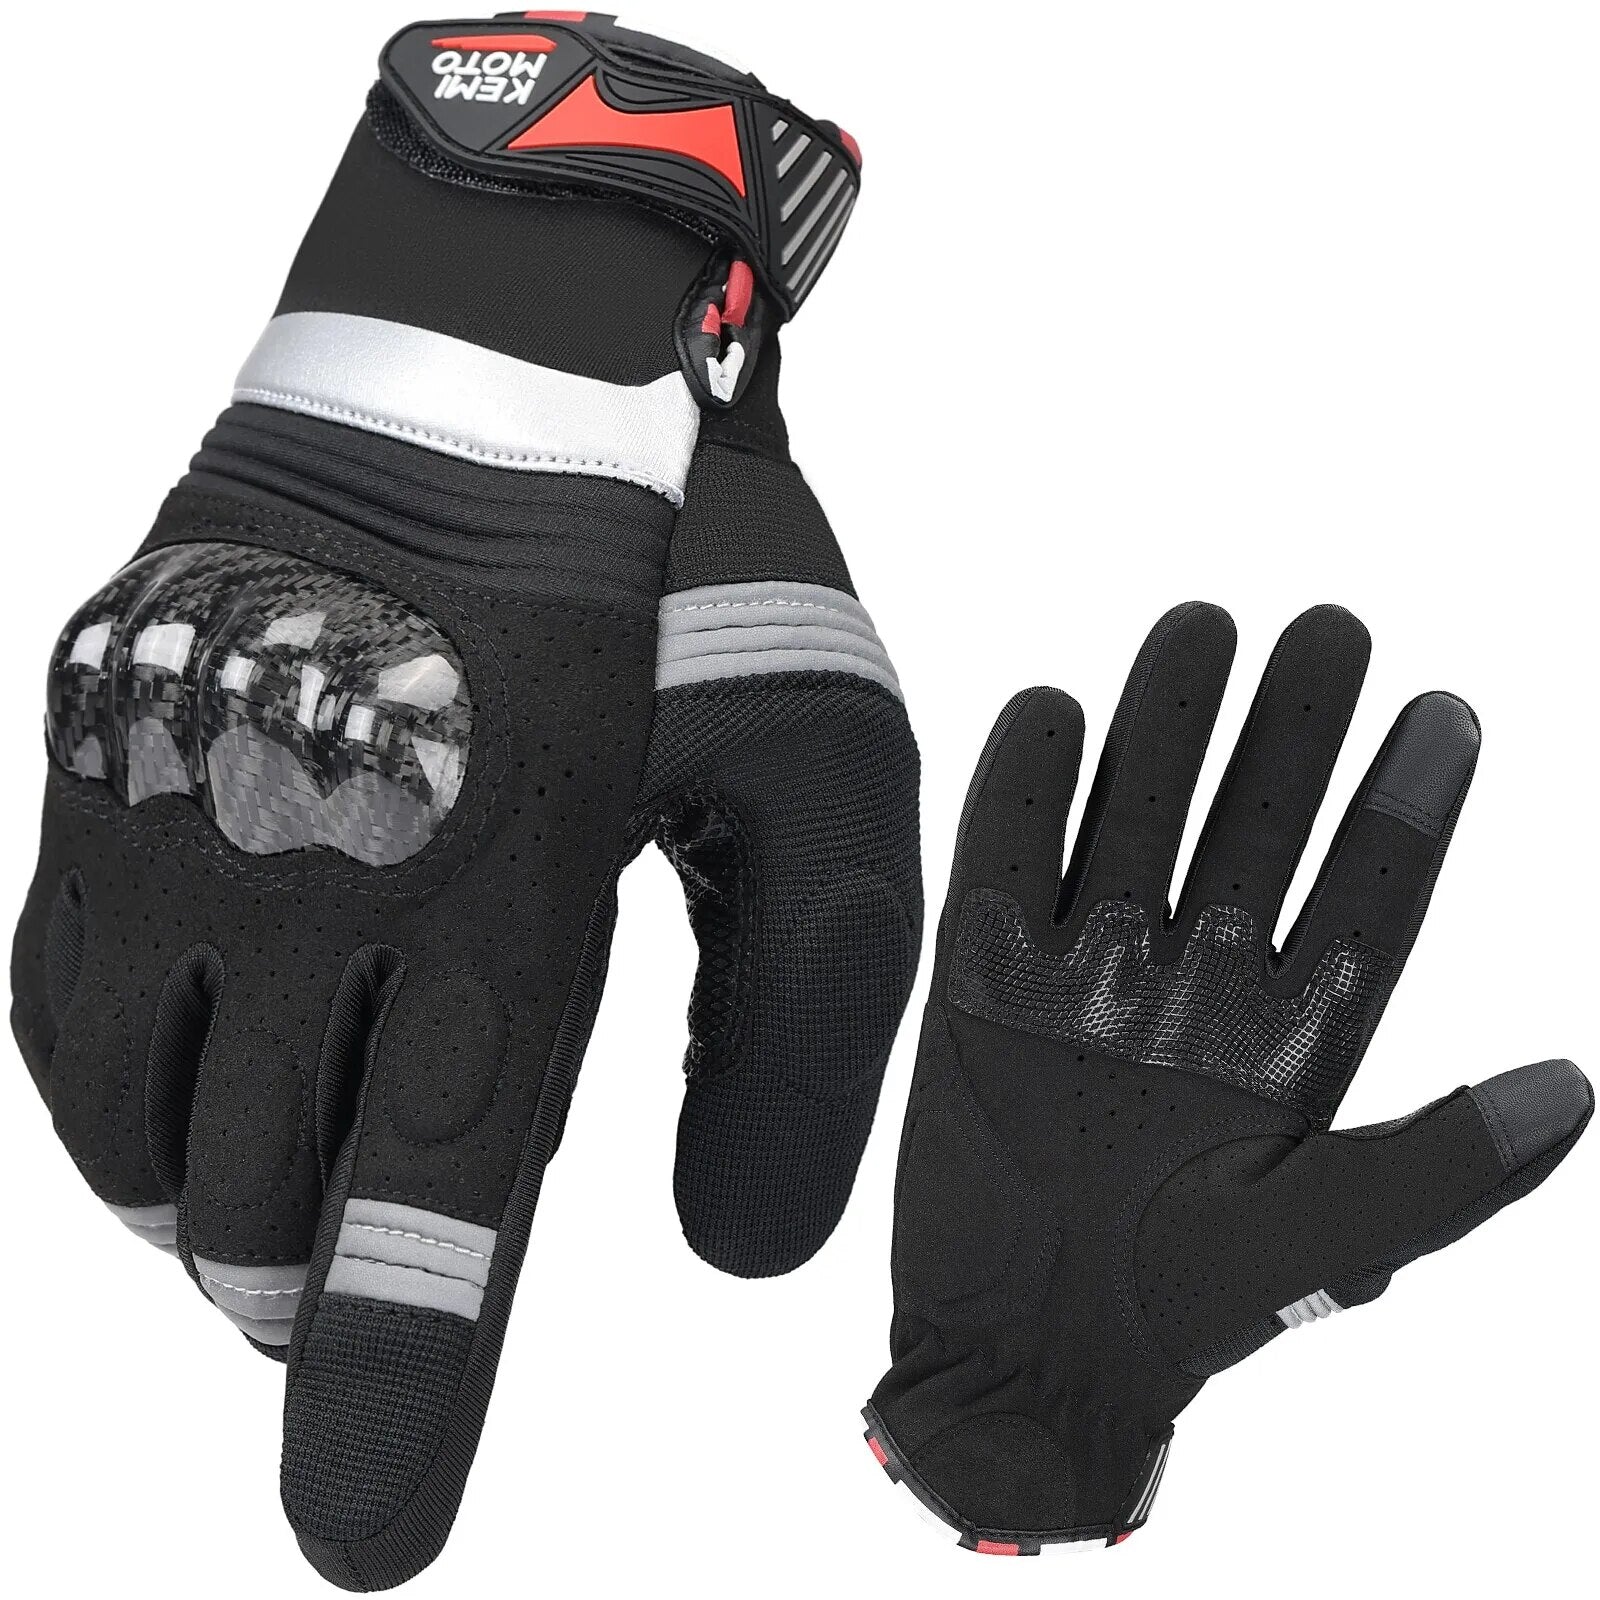 CE Motorcycle Gloves Carbon Fiber Protective Gear Summer Breathable Racing Gloves Leather Touch Screen Luvas Motocross